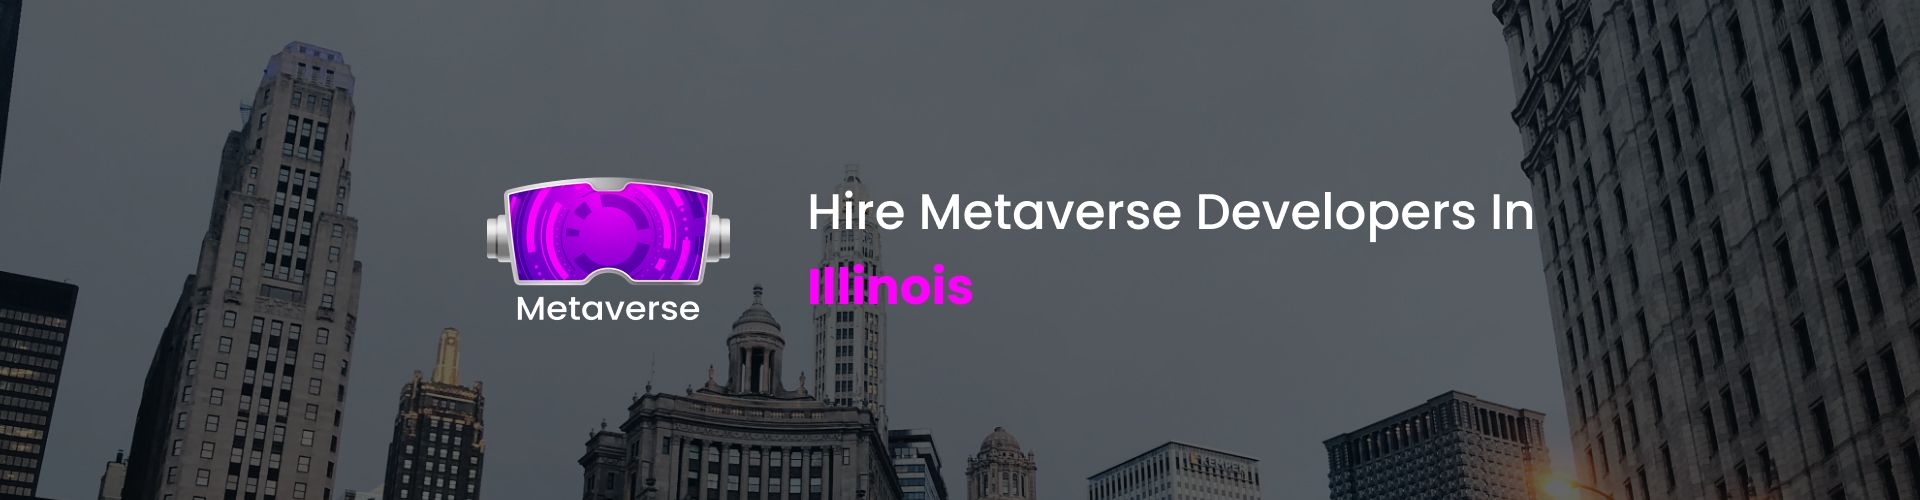 hire metaverse developers in illinois